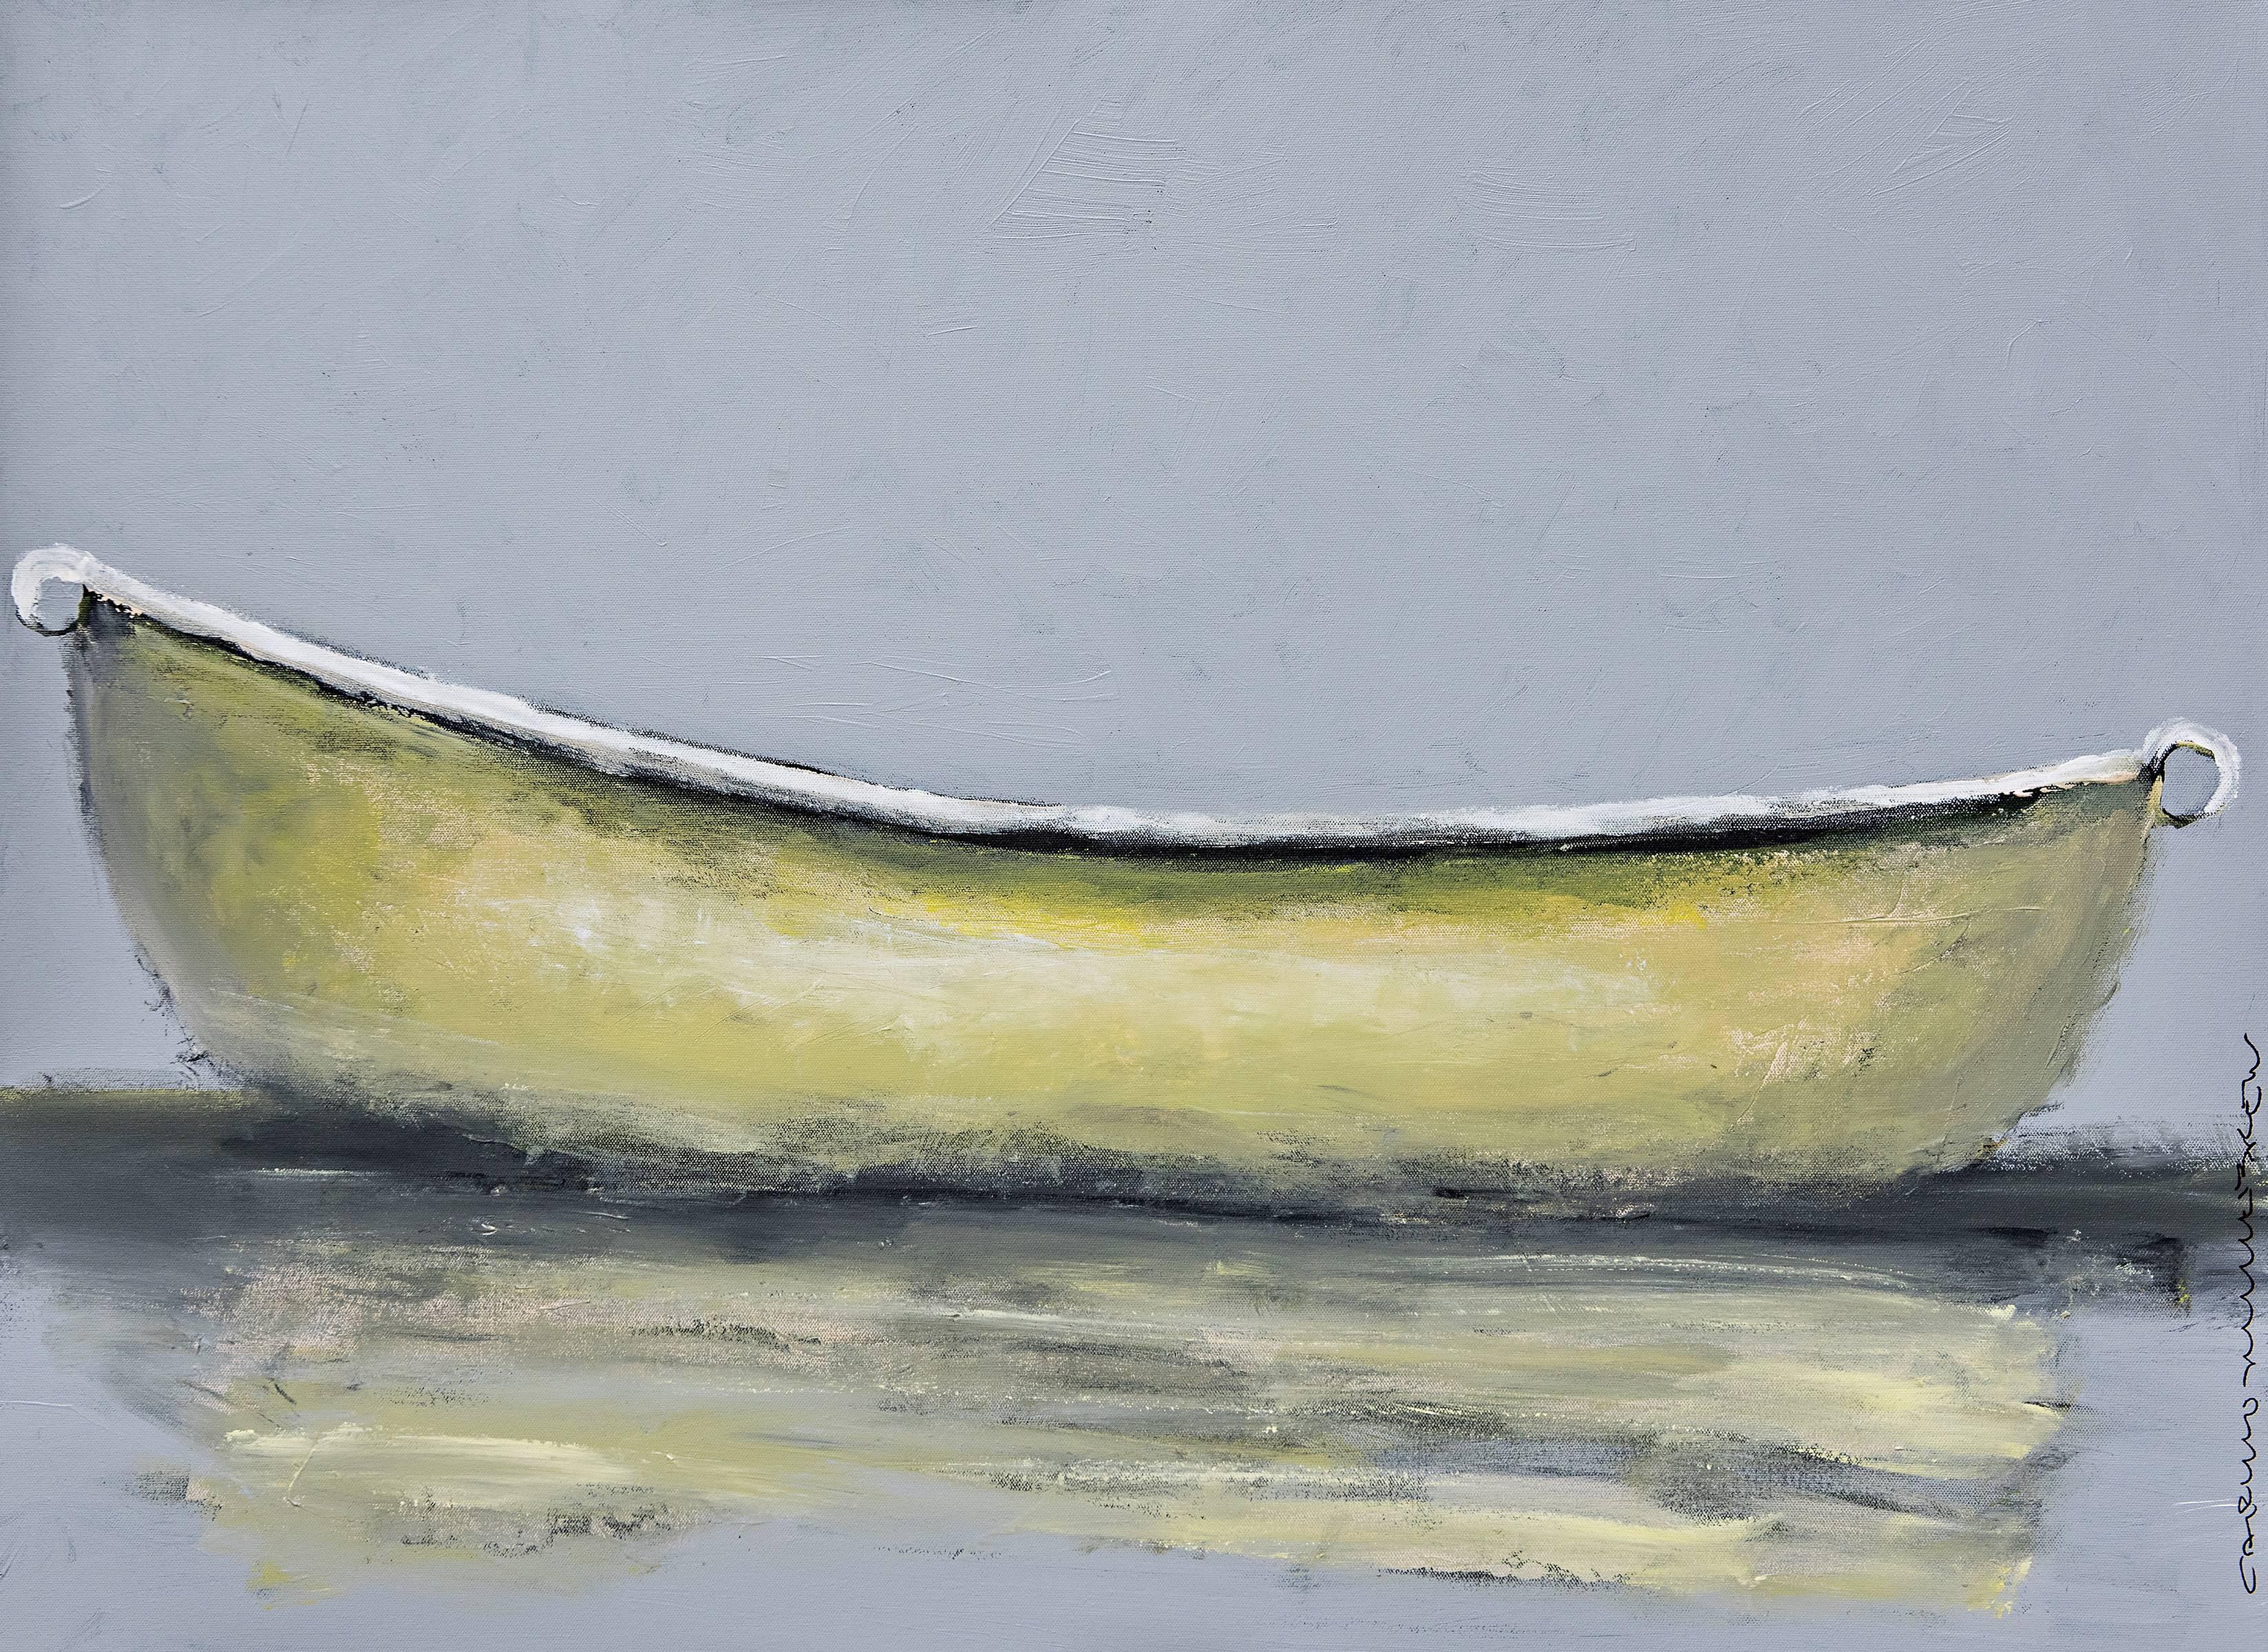 Carylon Killebrew Landscape Painting - 'A Good Man is Hard to Find' Large Contemporary Boat Oil on Canvas Painting